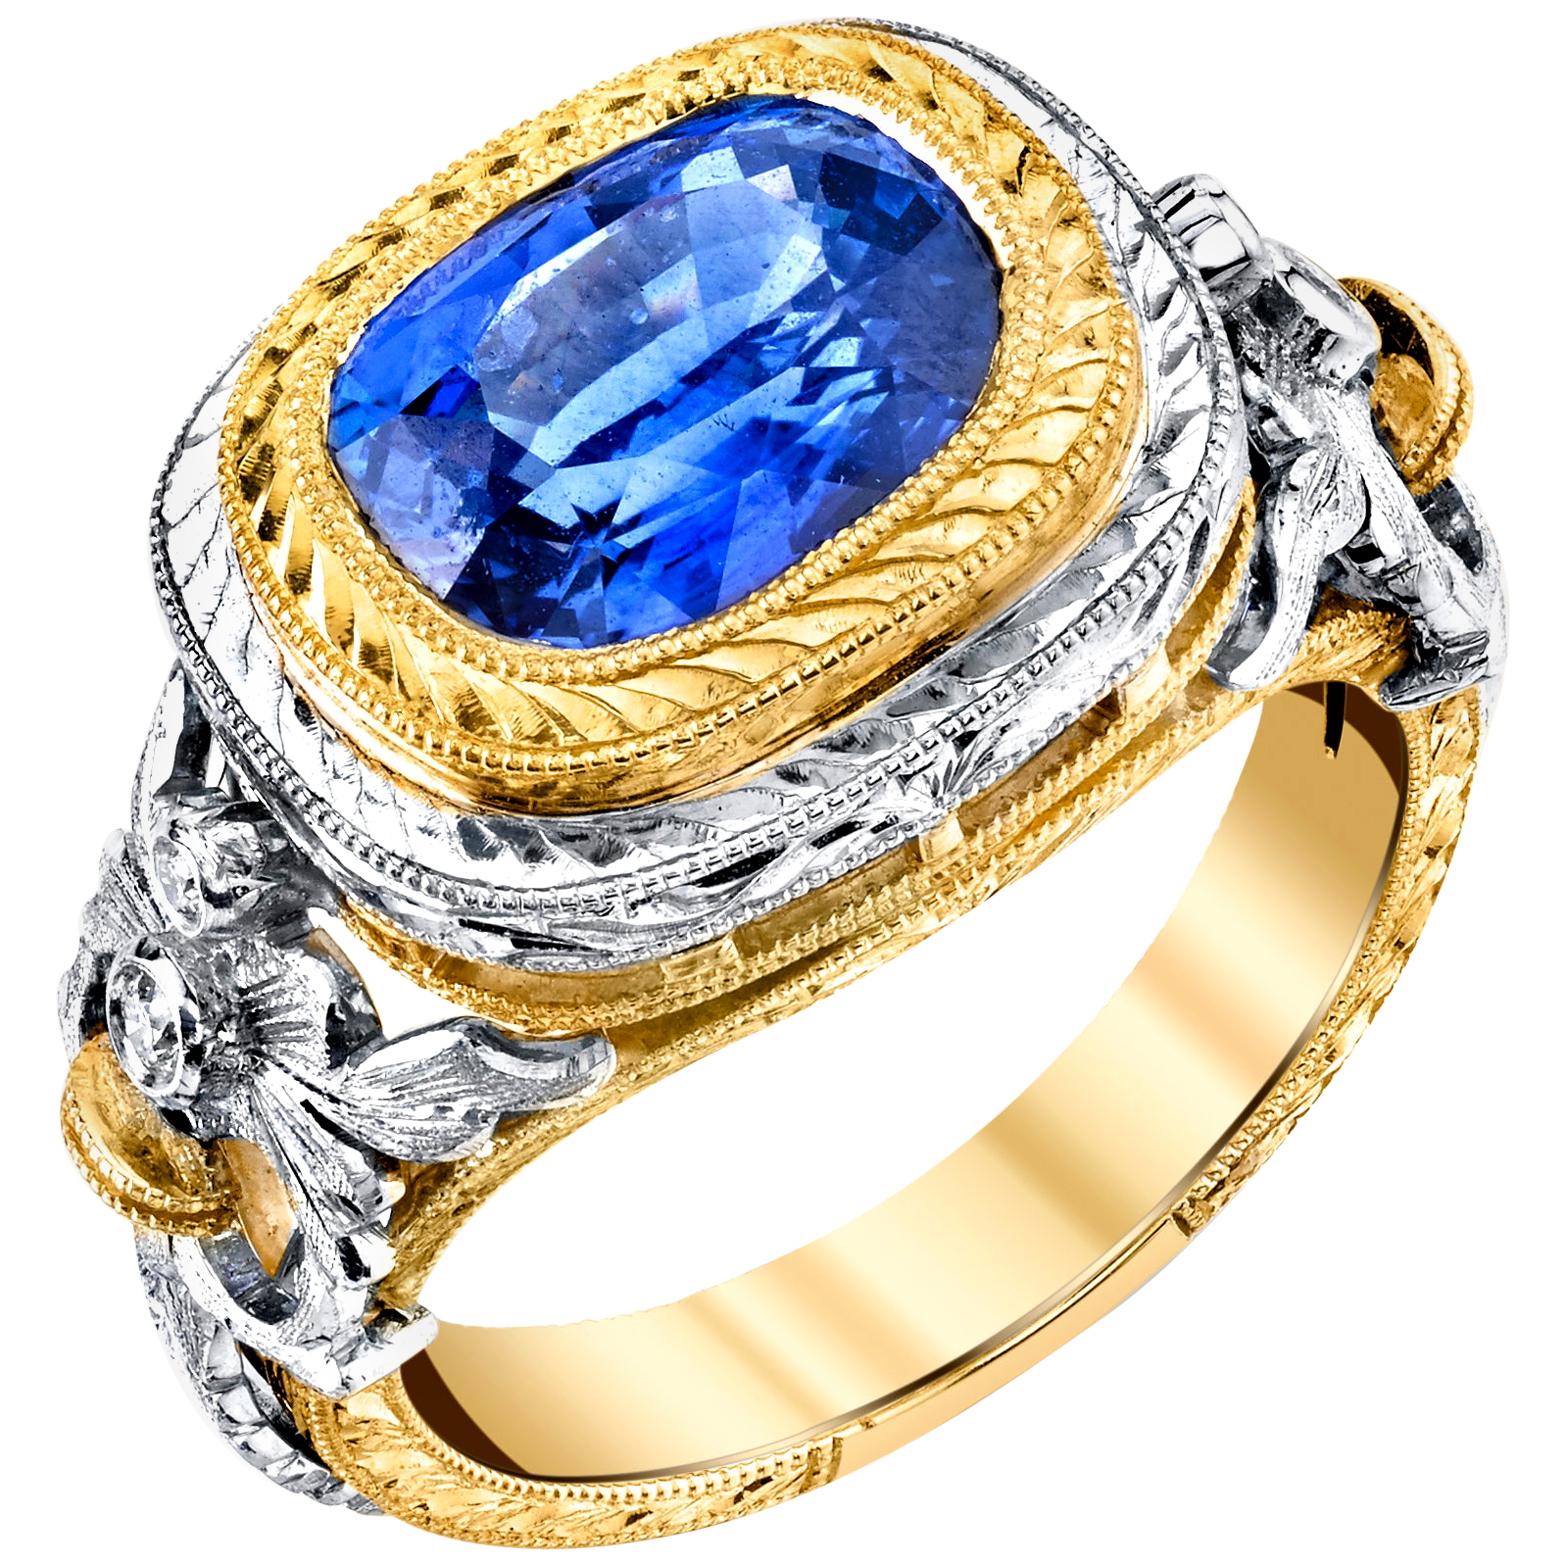 3.80 Carat Blue Sapphire and Diamond Ring, Handmade in 18k Yellow and White Gold